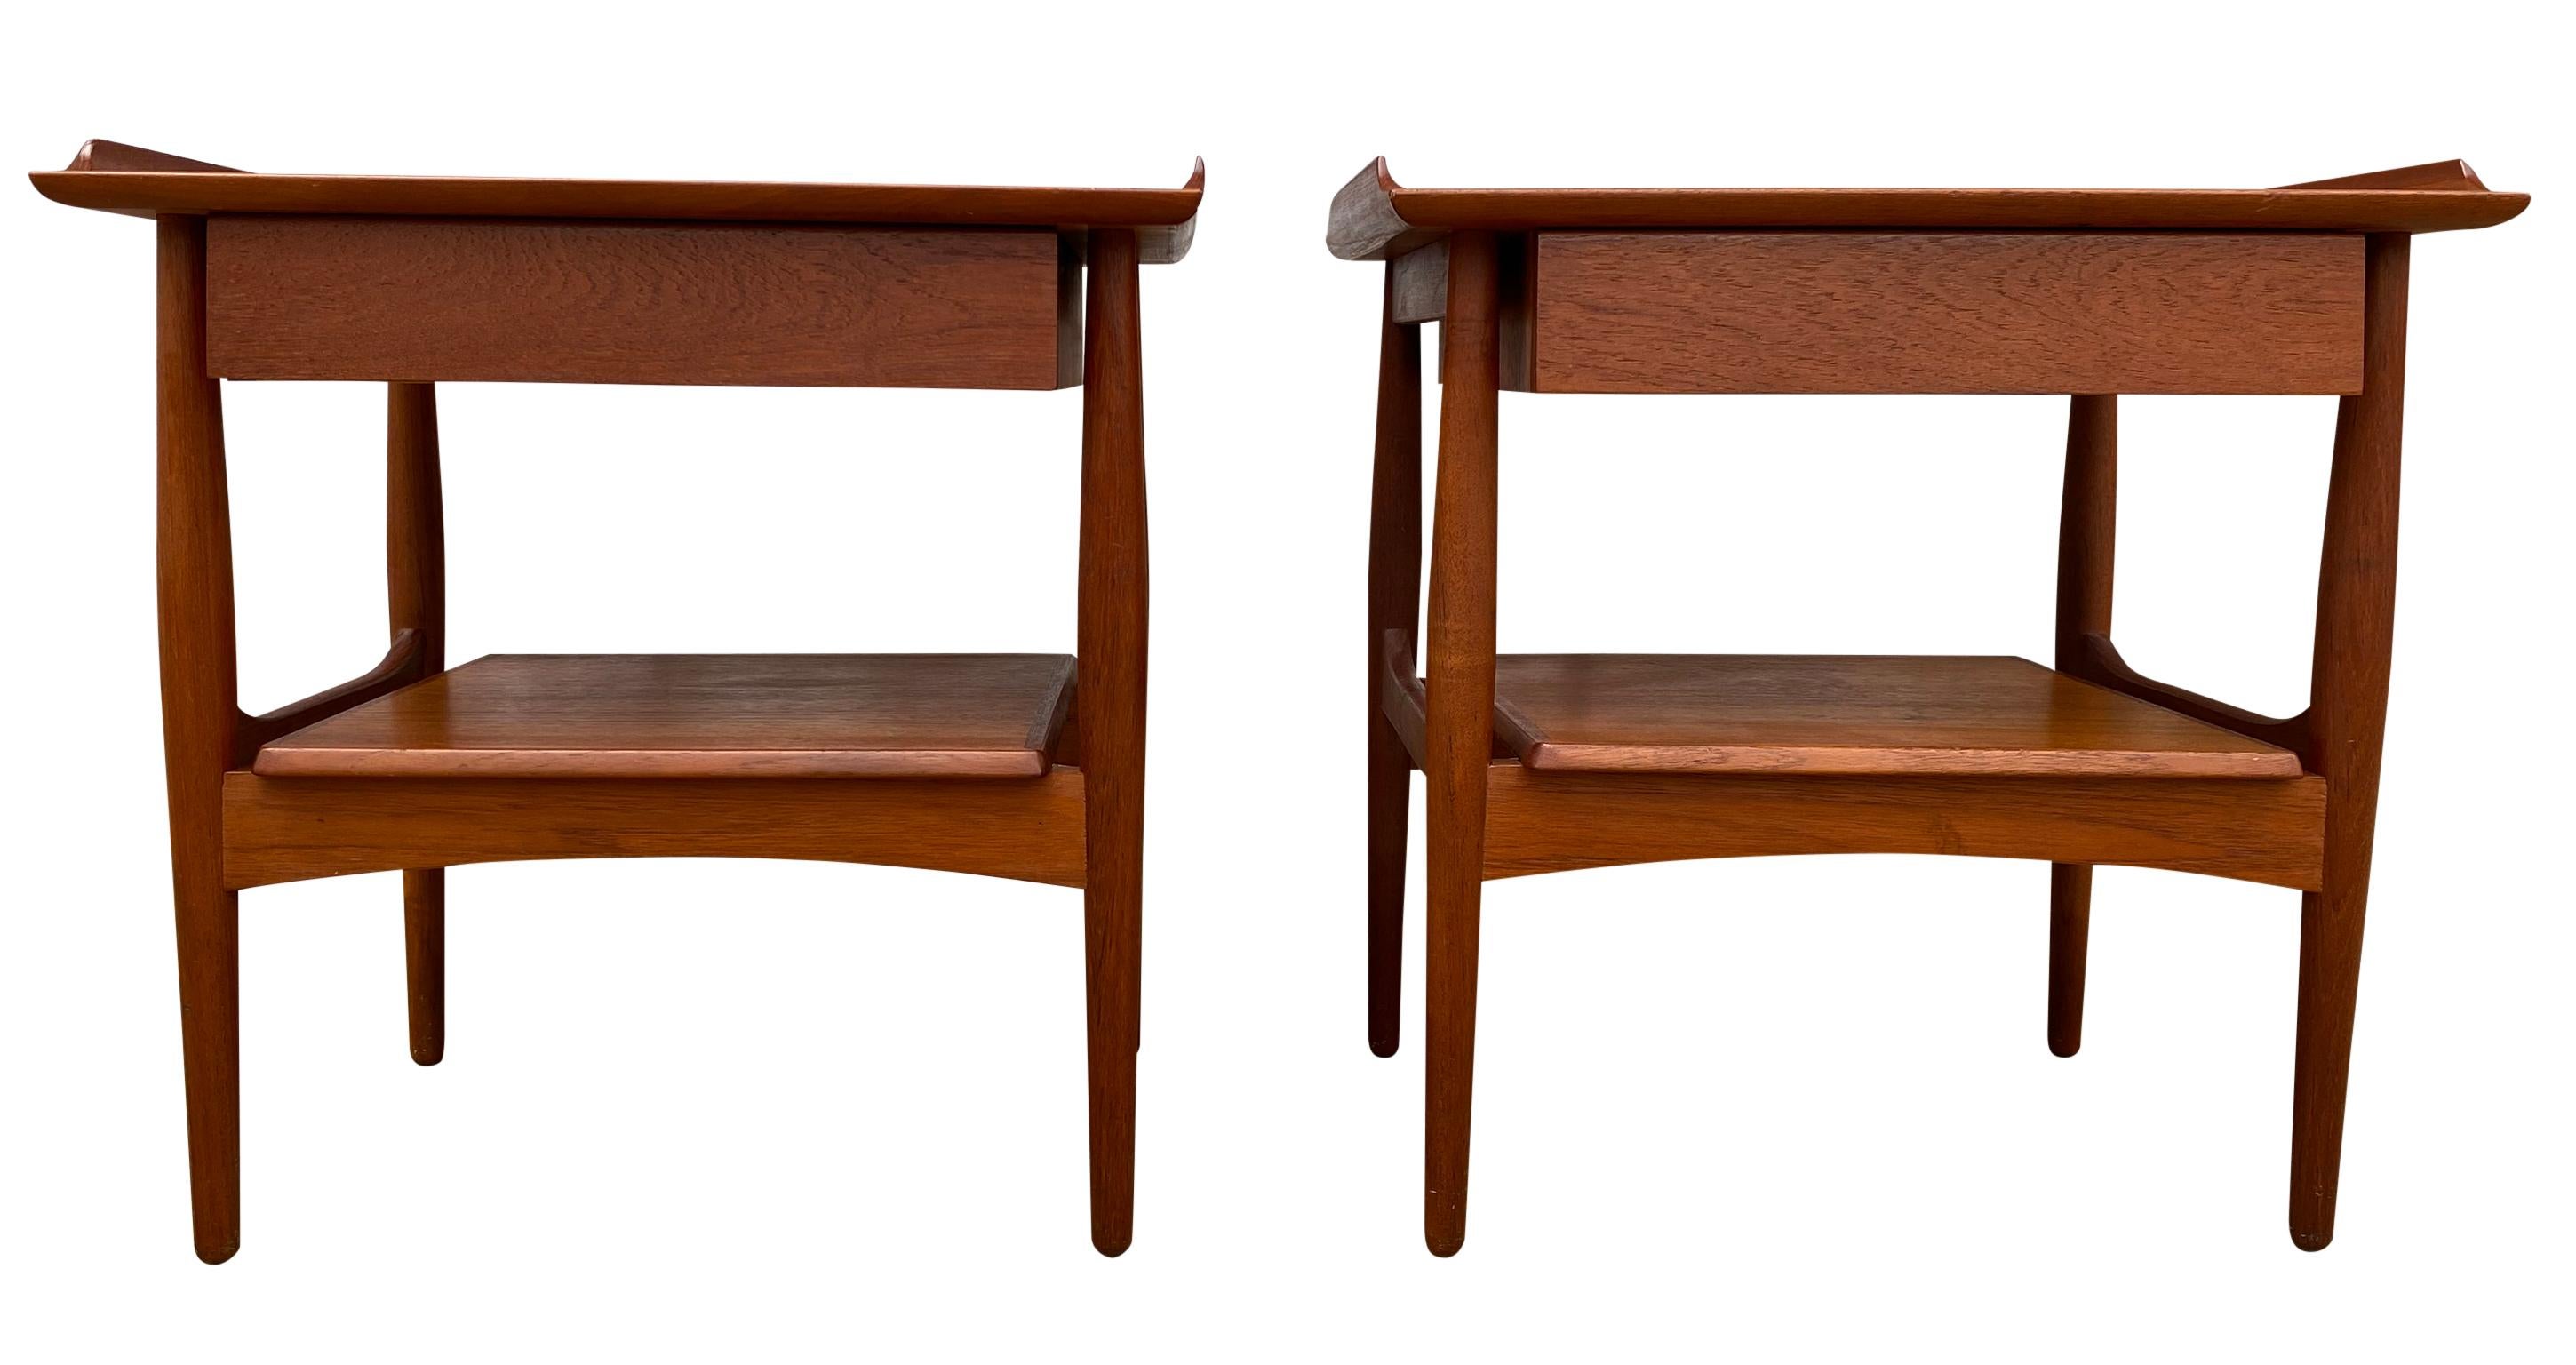 Beautiful pair of Danish modern teak nightstands lamp tables with single drawer Minimalist Professionally refinished. Very clean set of rare nightstands. Simple delicate design with tapered legs and lower shelf as well as a lipped top surface, all